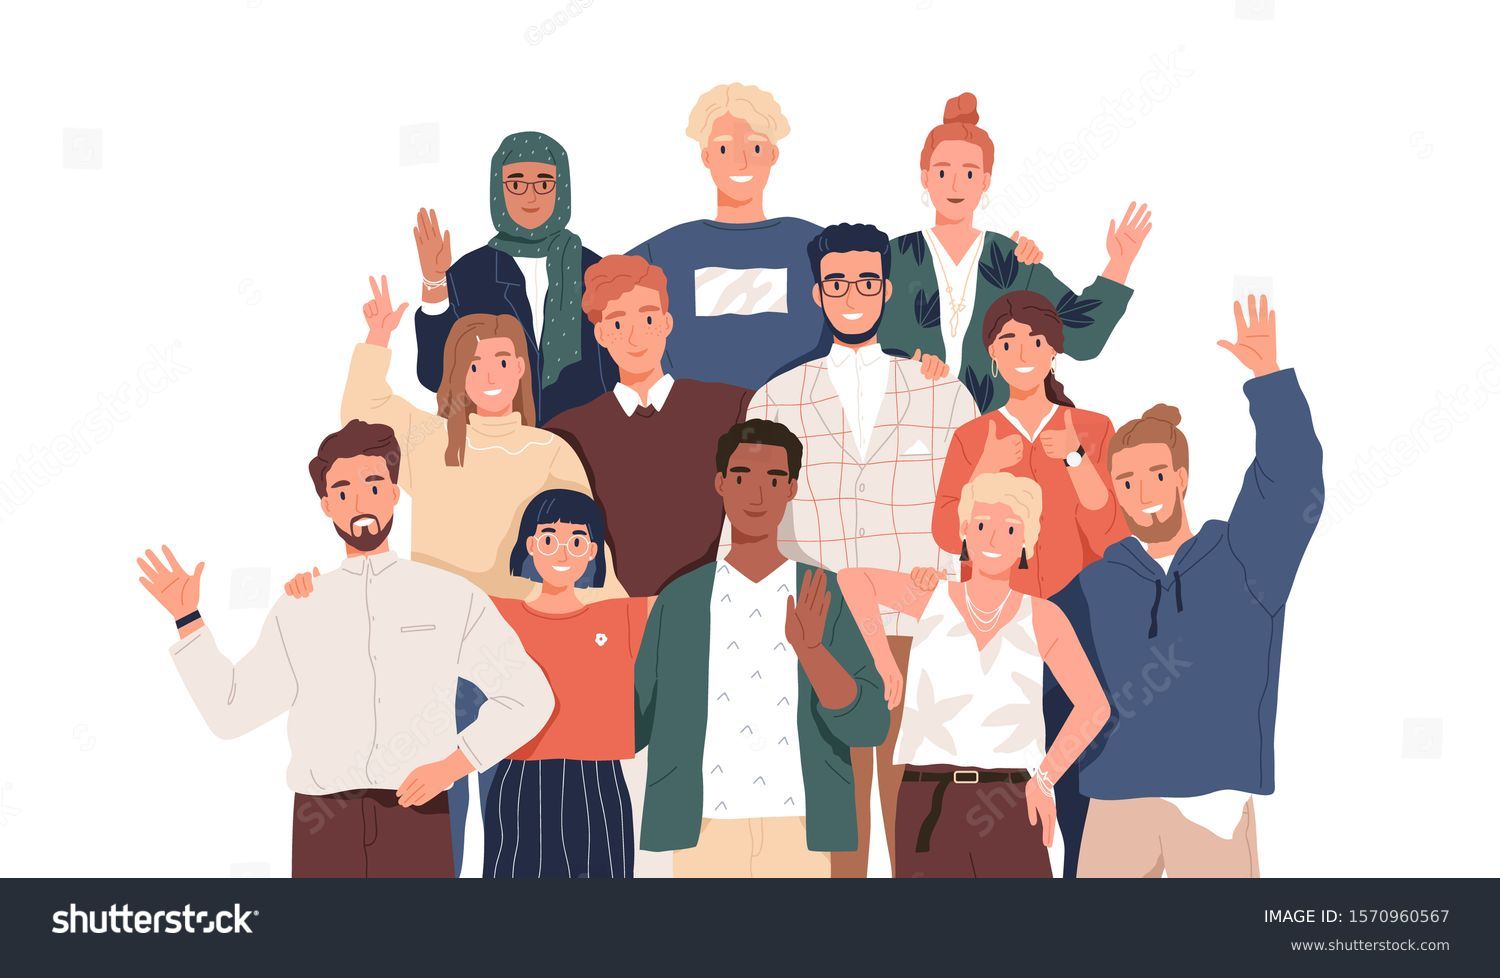 Multicultural team flat vector illustration. Unity in diversity. People of different nationalities and religions cartoon characters. Multinational society. Teamwork, cooperation, friendship concept. #1570960567